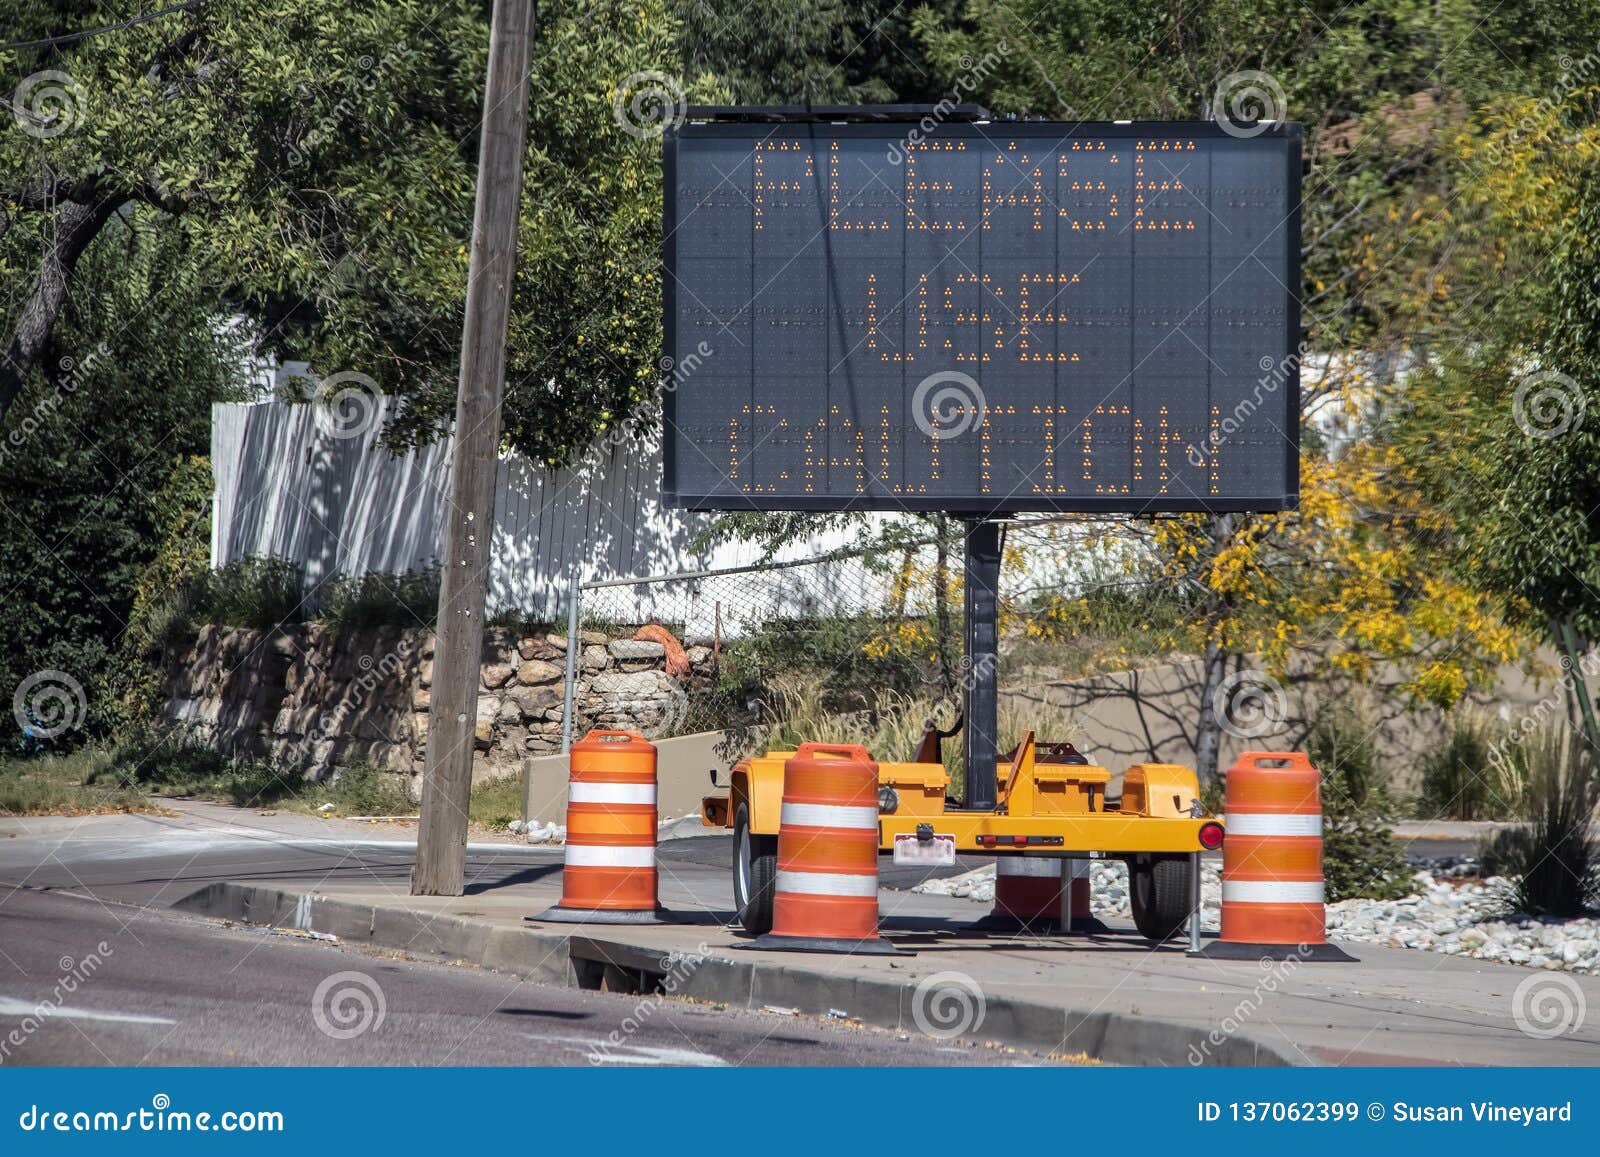 solar mobile sign with orange cones sitting on sidewalk besides road saying please use caution - selective focus